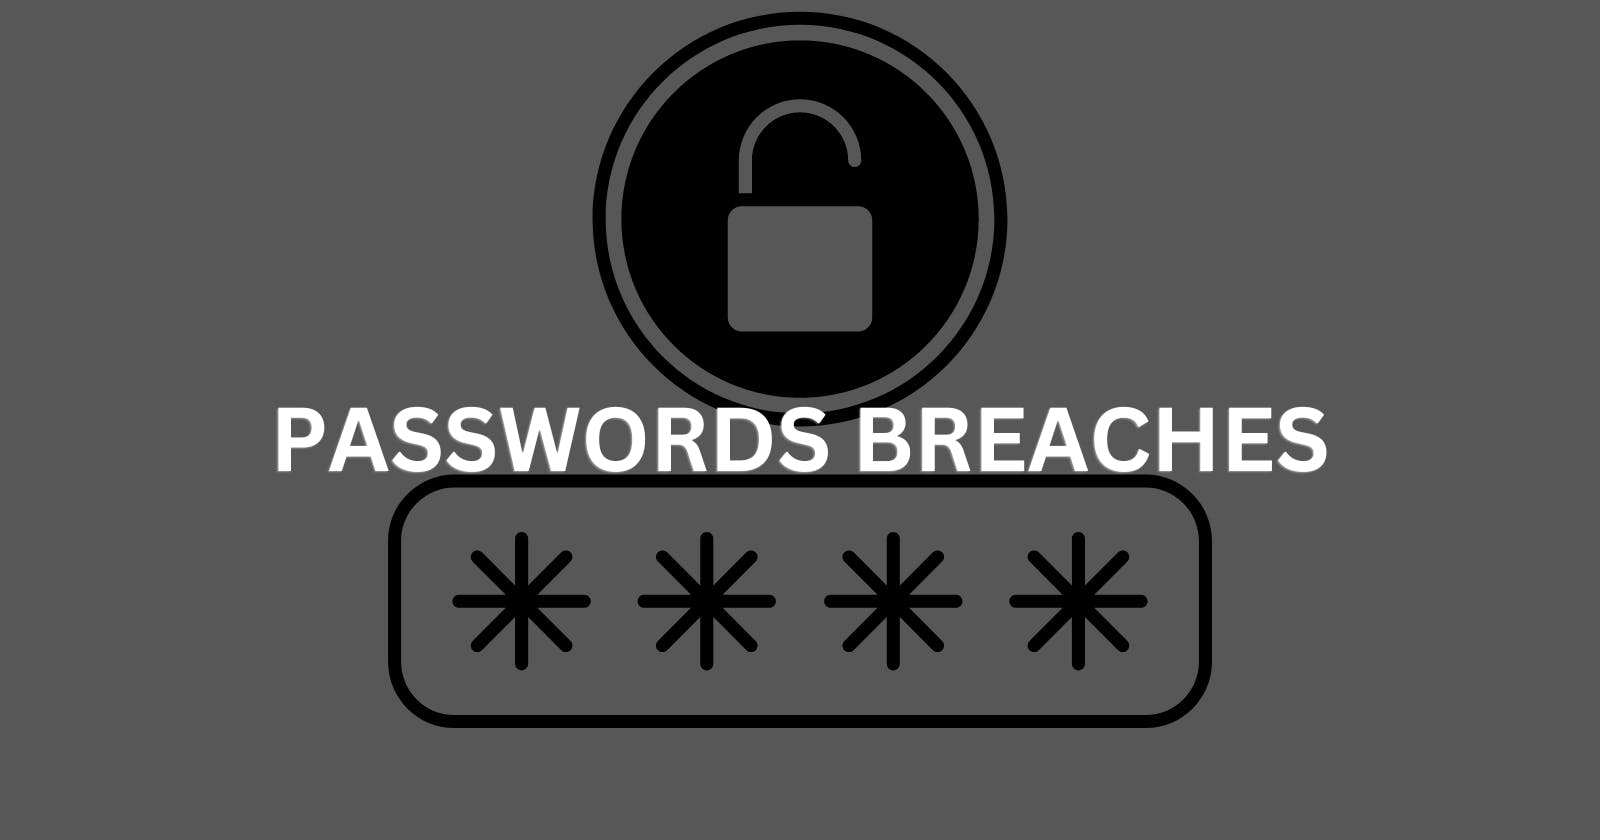 What Are Password Breaches and How To Prevent Them?